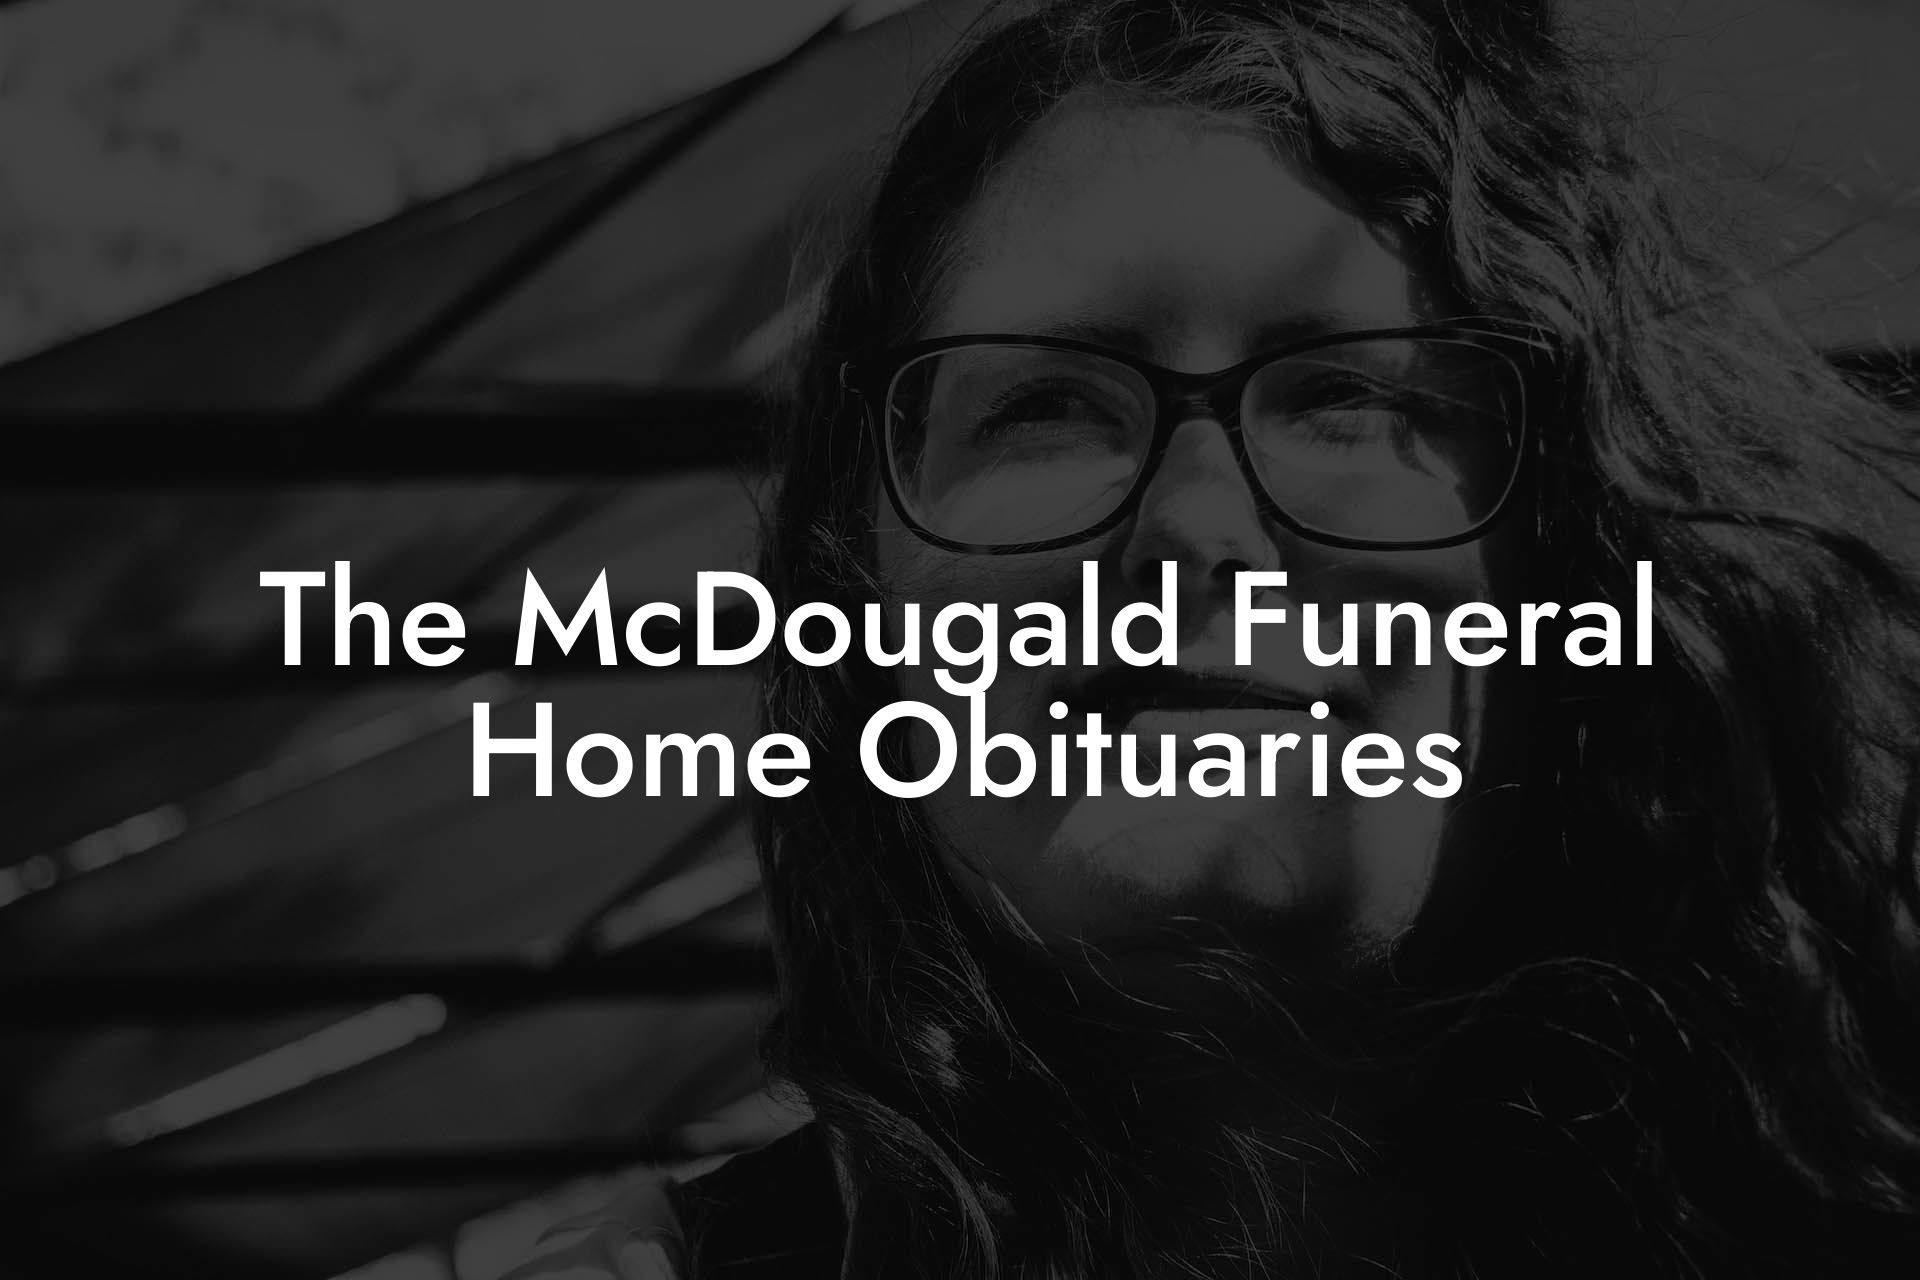 The McDougald Funeral Home Obituaries